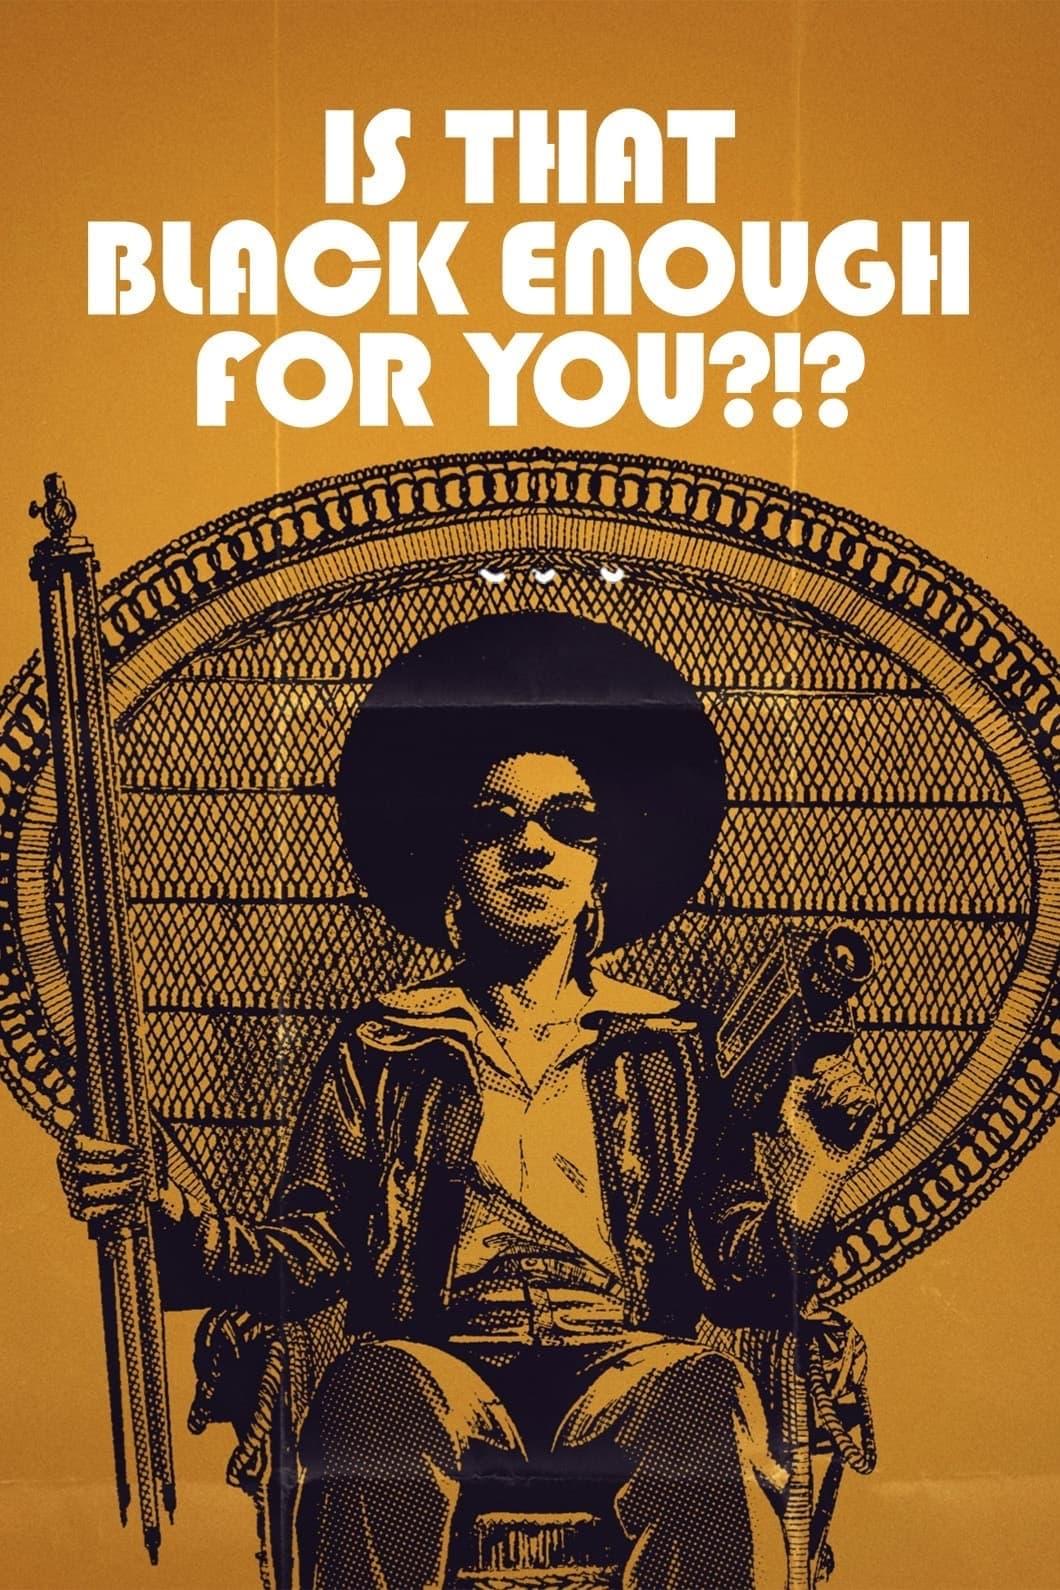 Is That Black Enough for You?!? poster